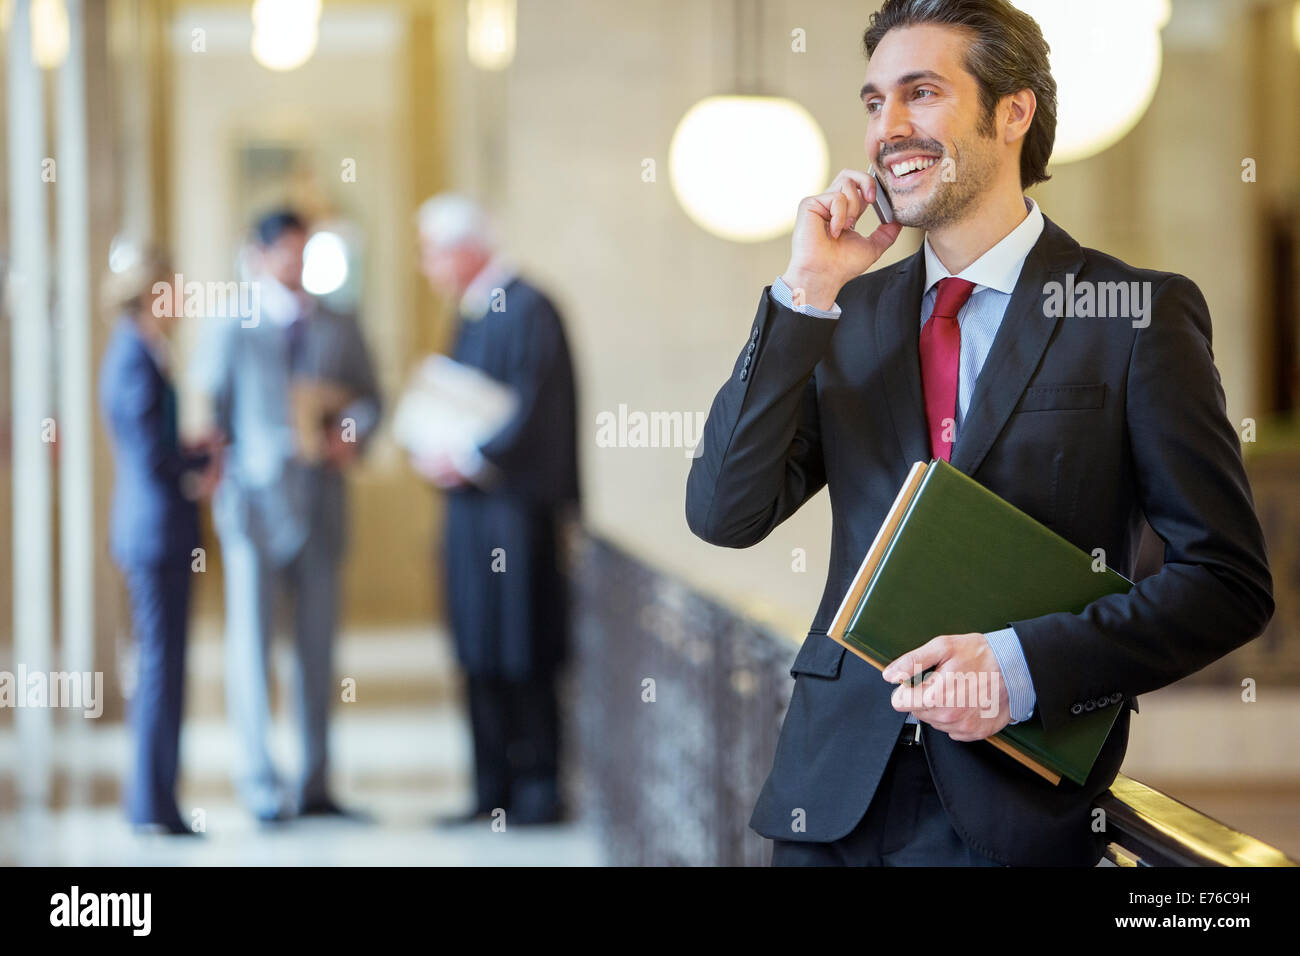 Lawyer talking on cell phone in courthouse Stock Photo